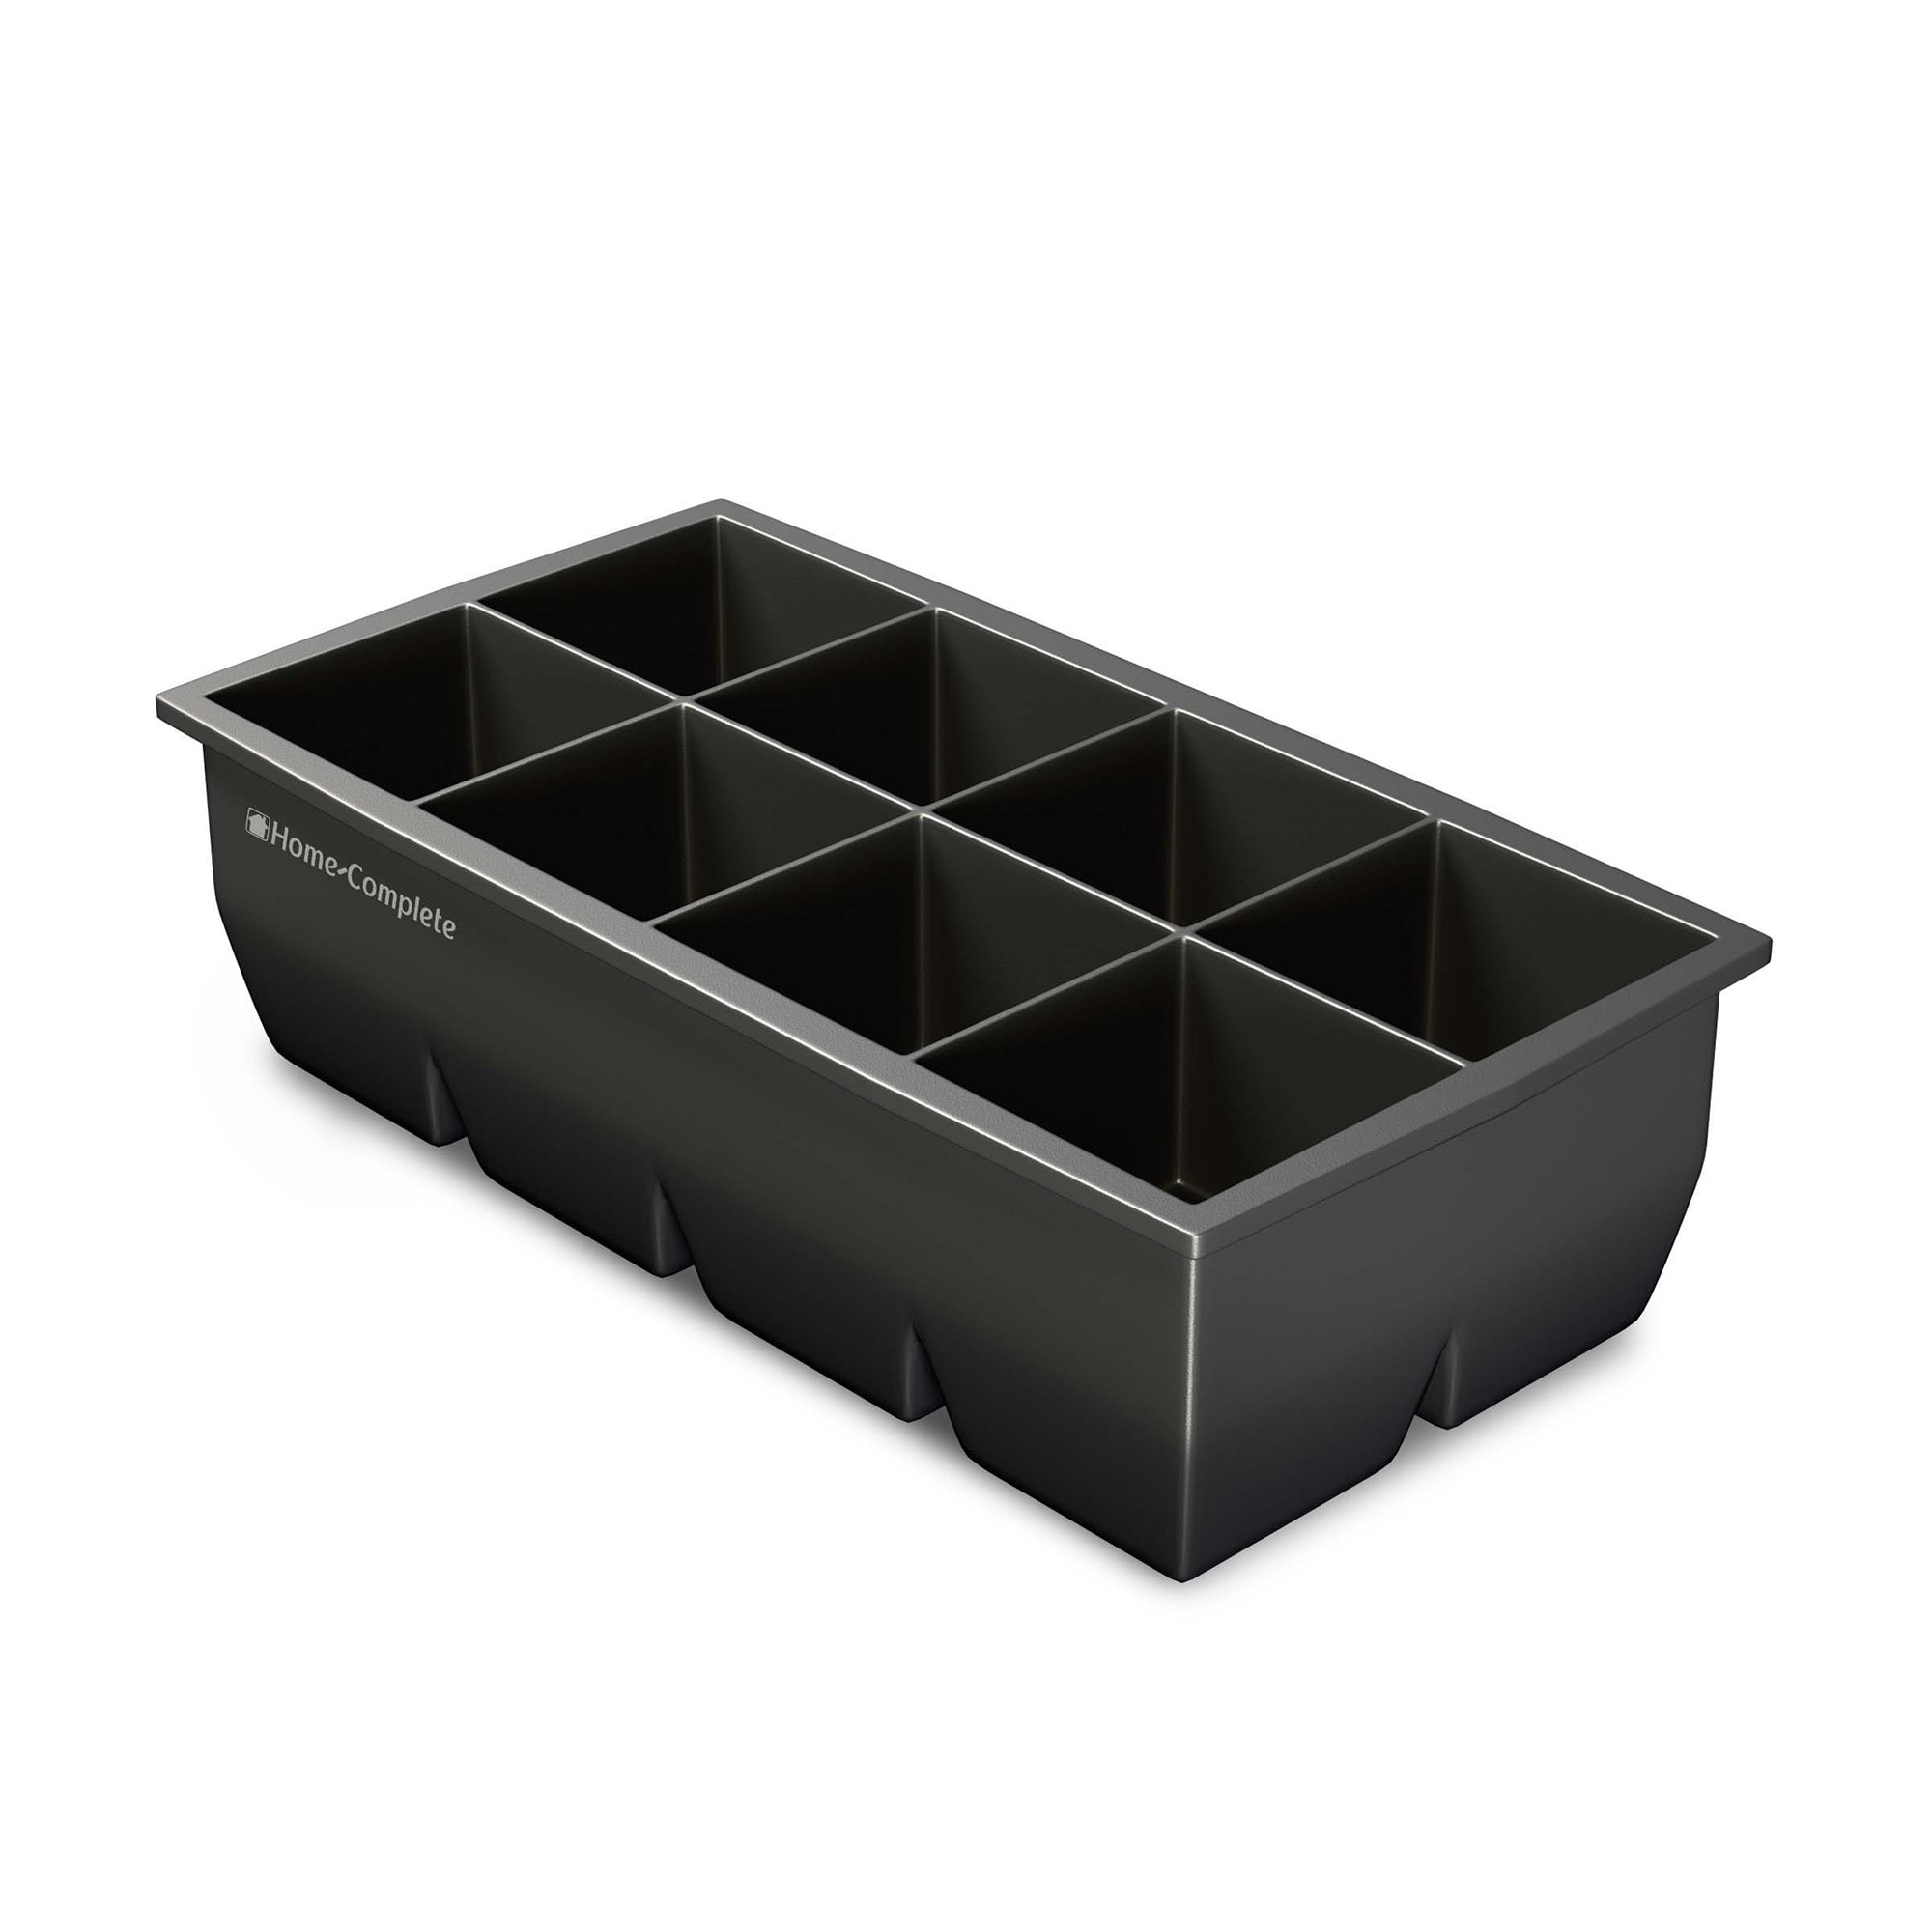 https://ak1.ostkcdn.com/images/products/is/images/direct/39caca8a585f15e9c88c53902e85fe984d3ff31b/Large-Ice-Cube-Tray-by-Home-Complete.jpg